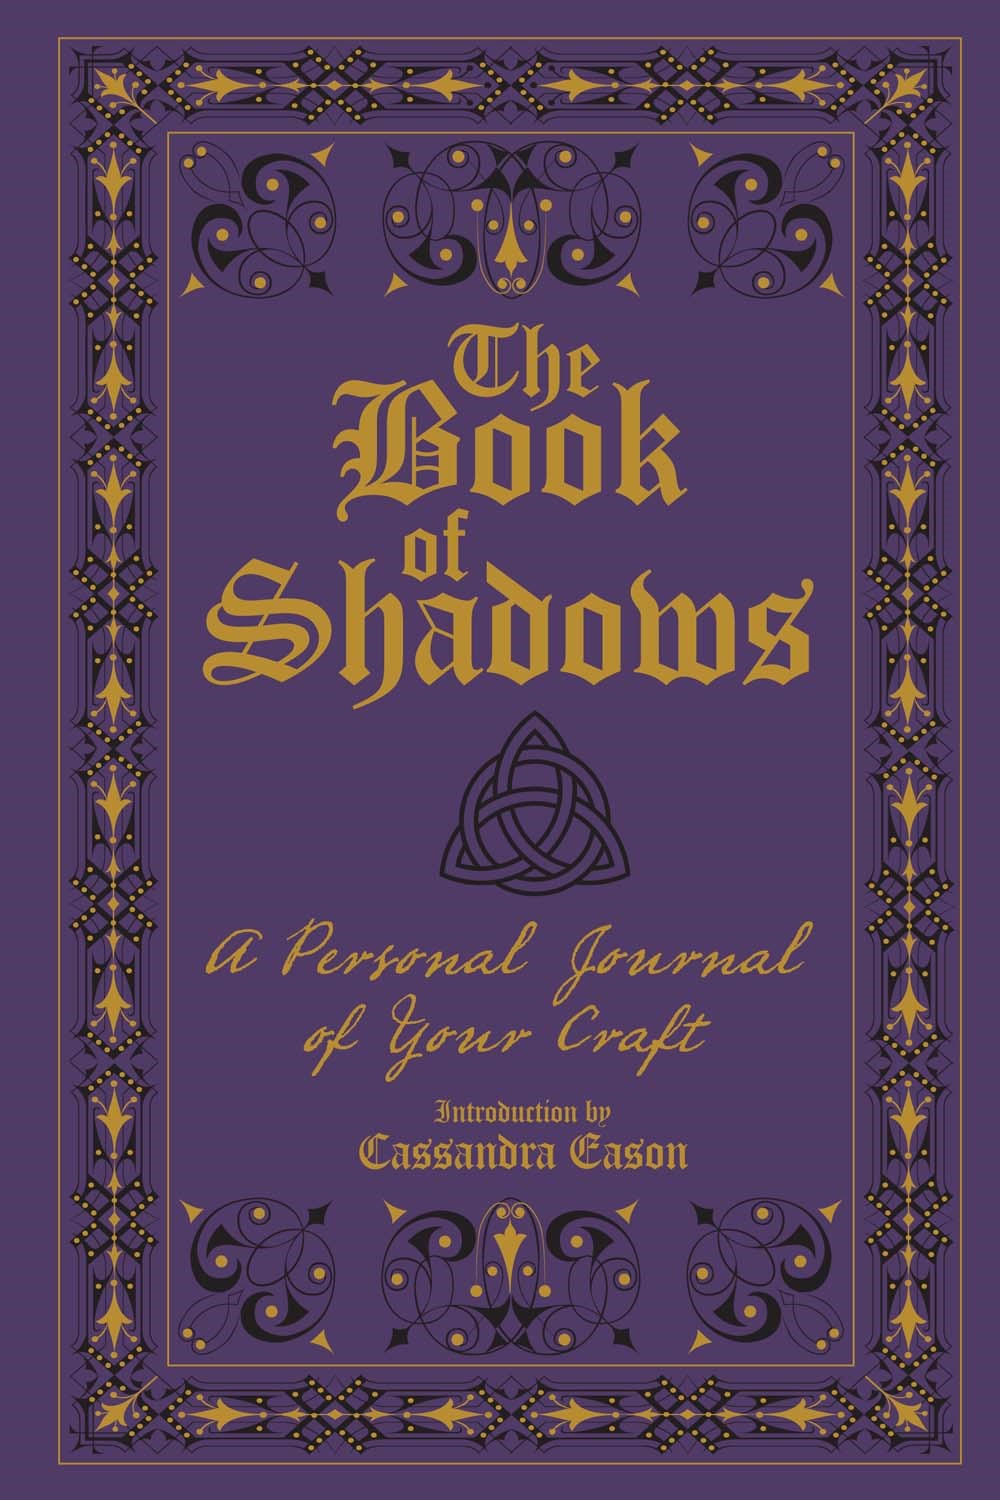 The Book of Shadows Journal